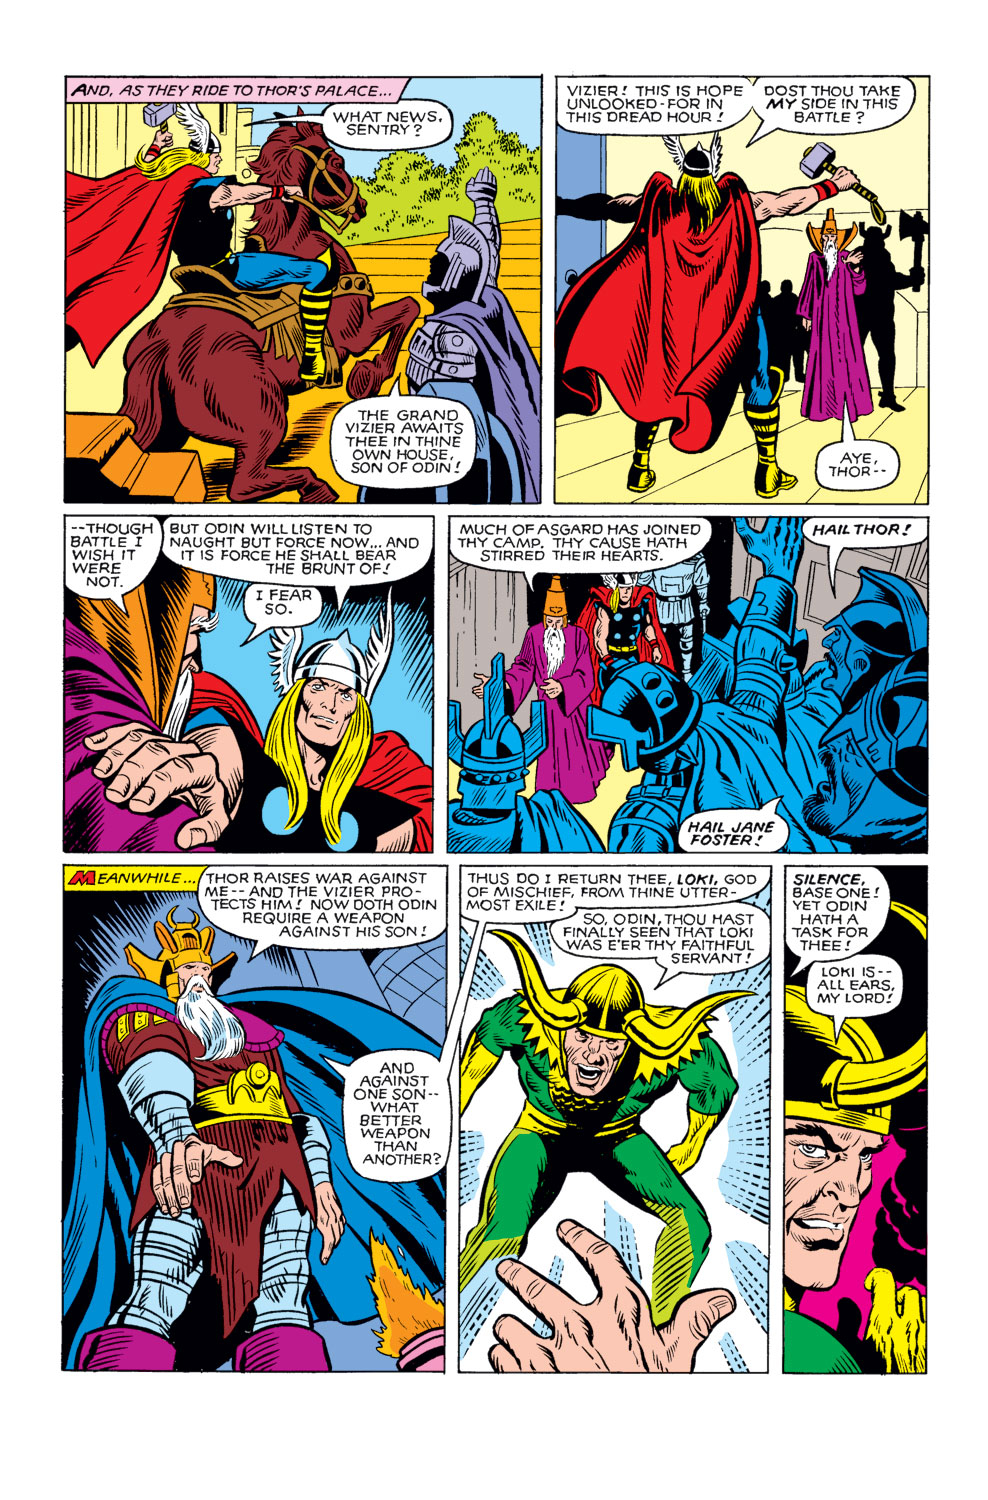 What If? (1977) Issue #25 - Thor and the Avengers battled the gods #25 - English 10